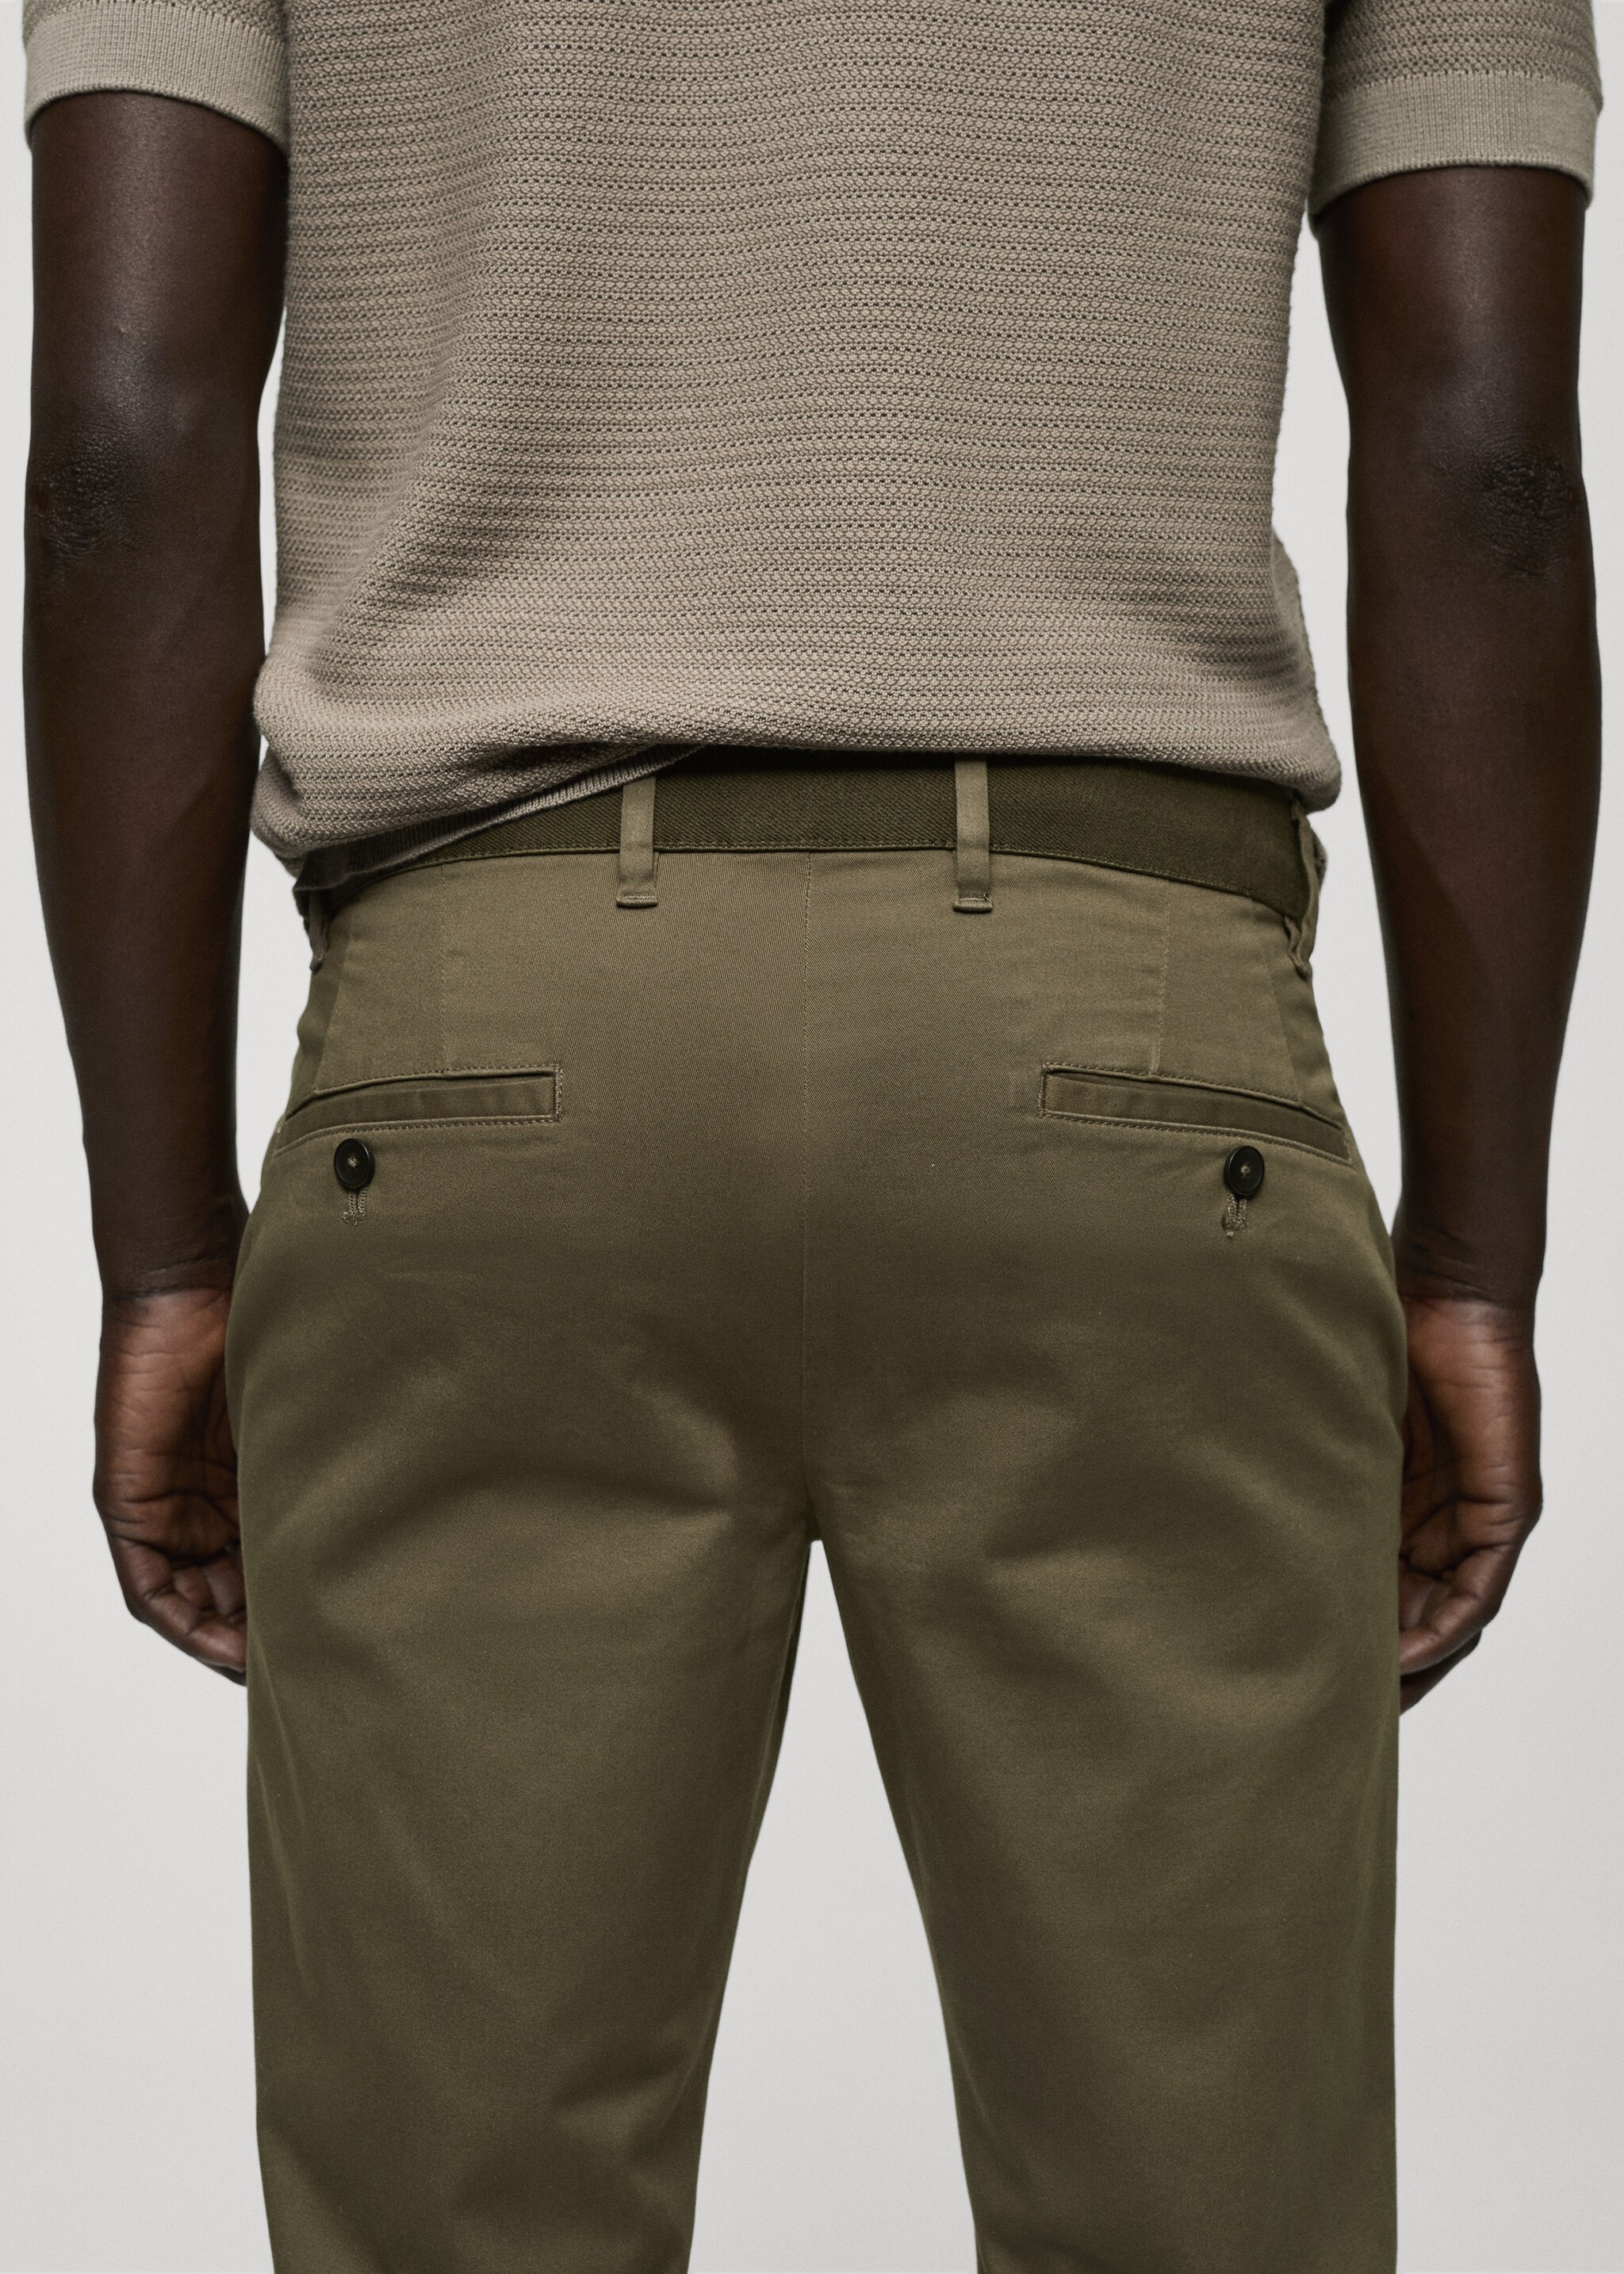 Cotton tapered crop pants - Details of the article 6